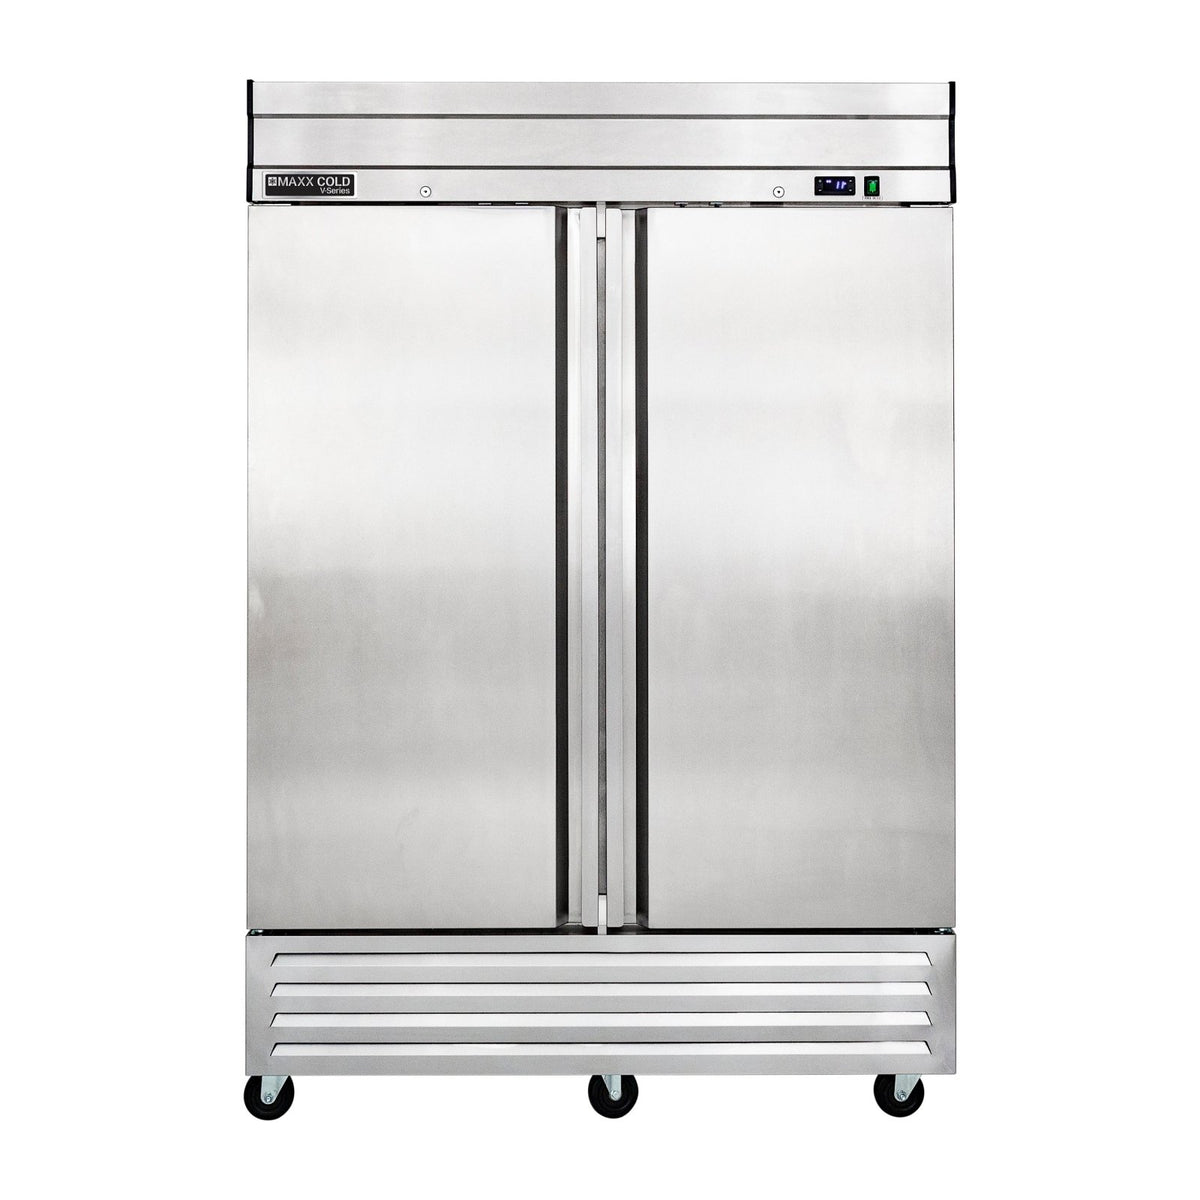 Maxx Cold MVF - 49FD V - Series 2 Door Reach - In Freezer, Bottom Mount, 54"W, 42 cu. ft. Storage Capacity, in Stainless Steel (MVF - 49FDHC) - TheChefStore.Com